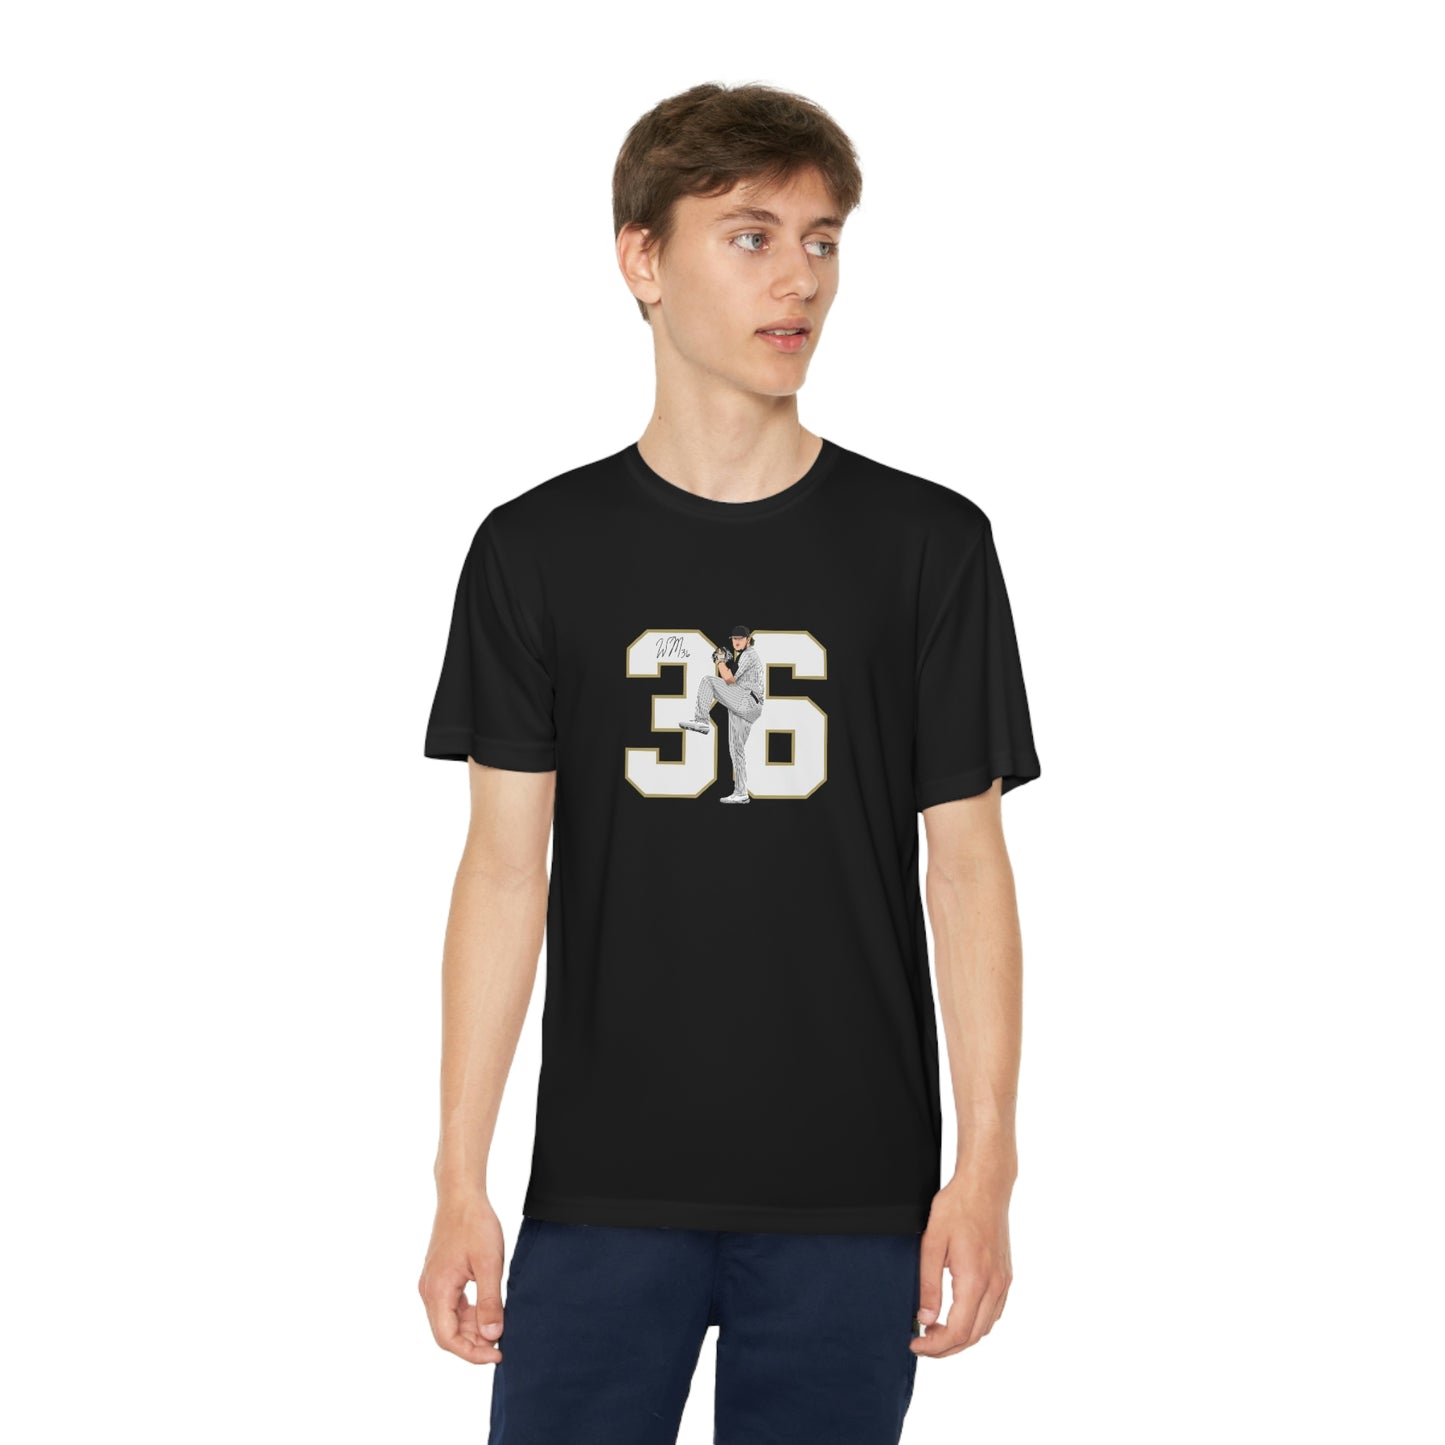 Will Melby YOUTH Performance Shirt